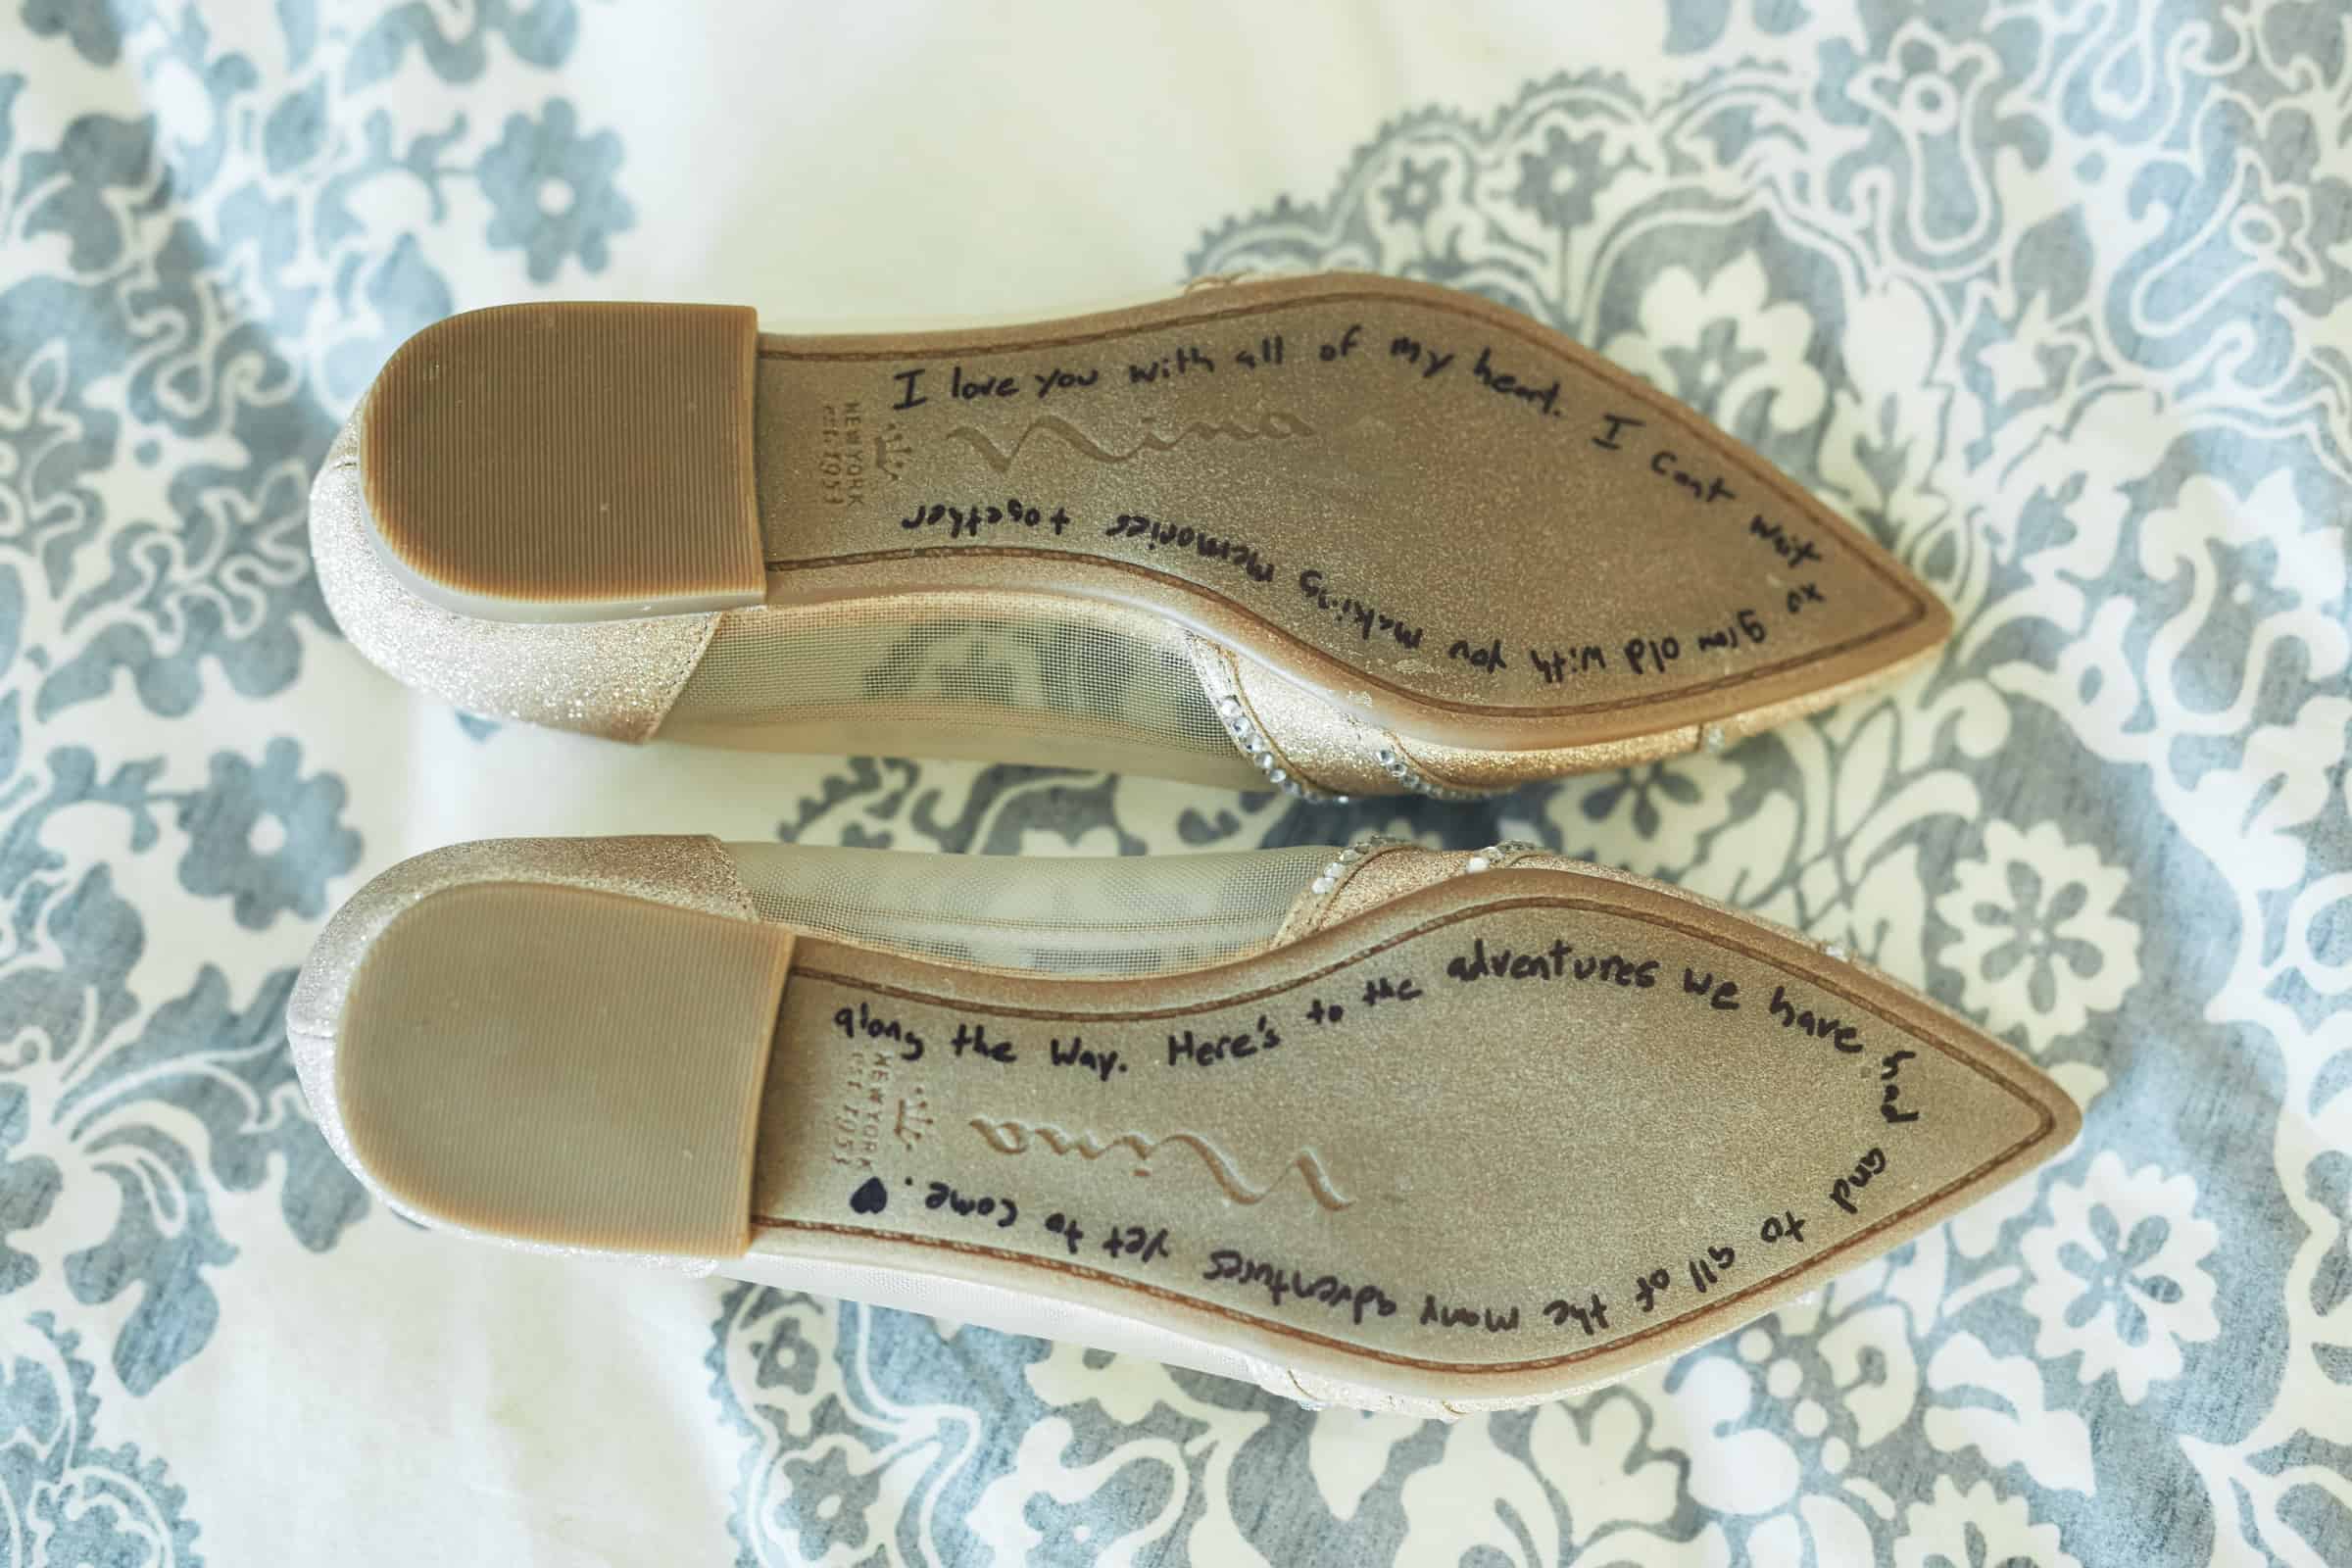 Bride's shoes with note on the bottom